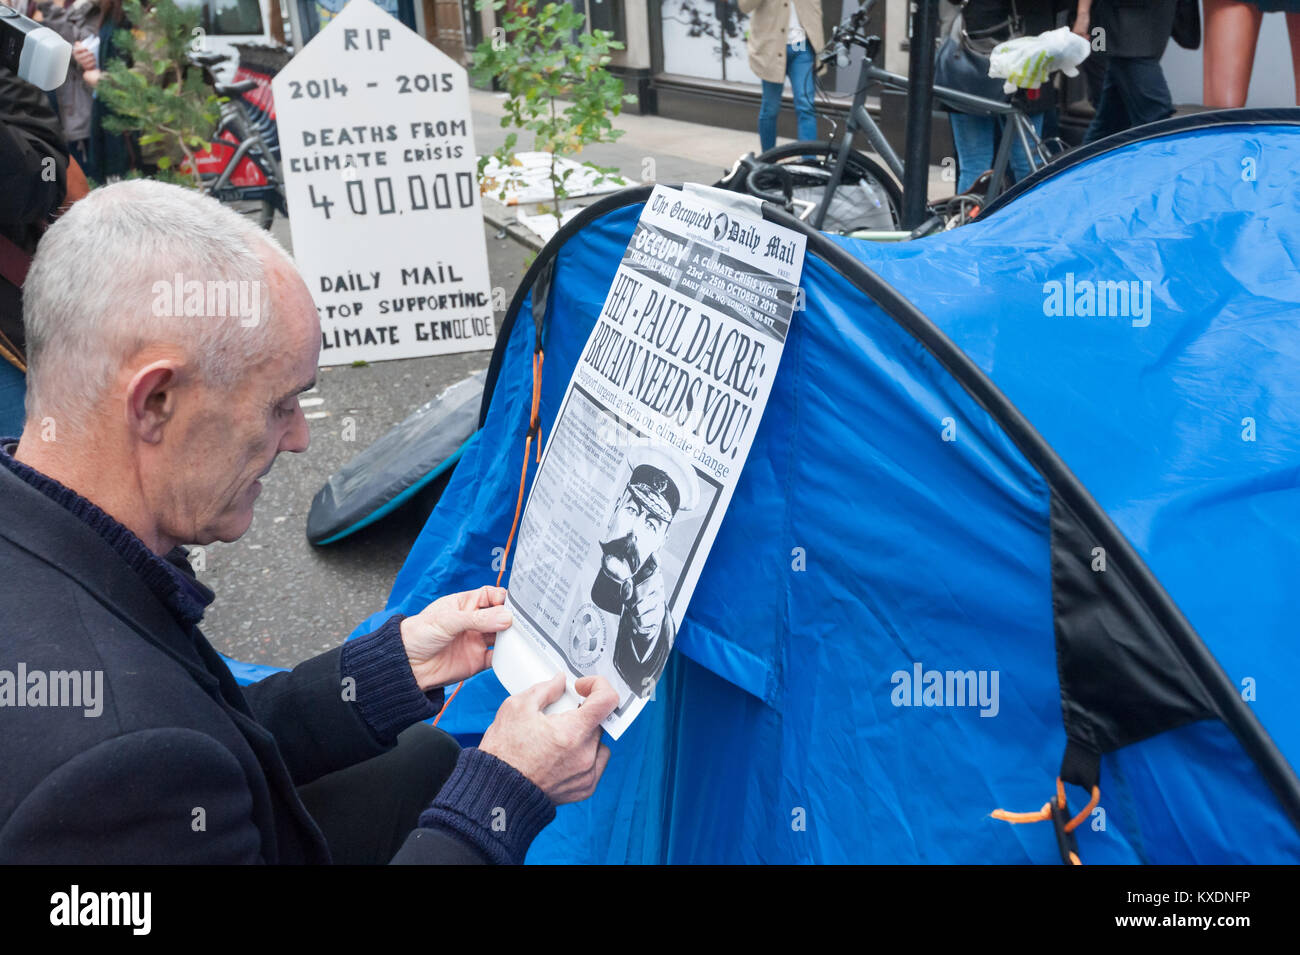 Donnachadh McCarthy tapes 'The Occupied Daily Mail' to a tent at the start of a 48 hour protest by Occupy to persuade the Daily Mail to end support for fossil fuels and climate deniers and promote policies which mitigate climate change. Stock Photo